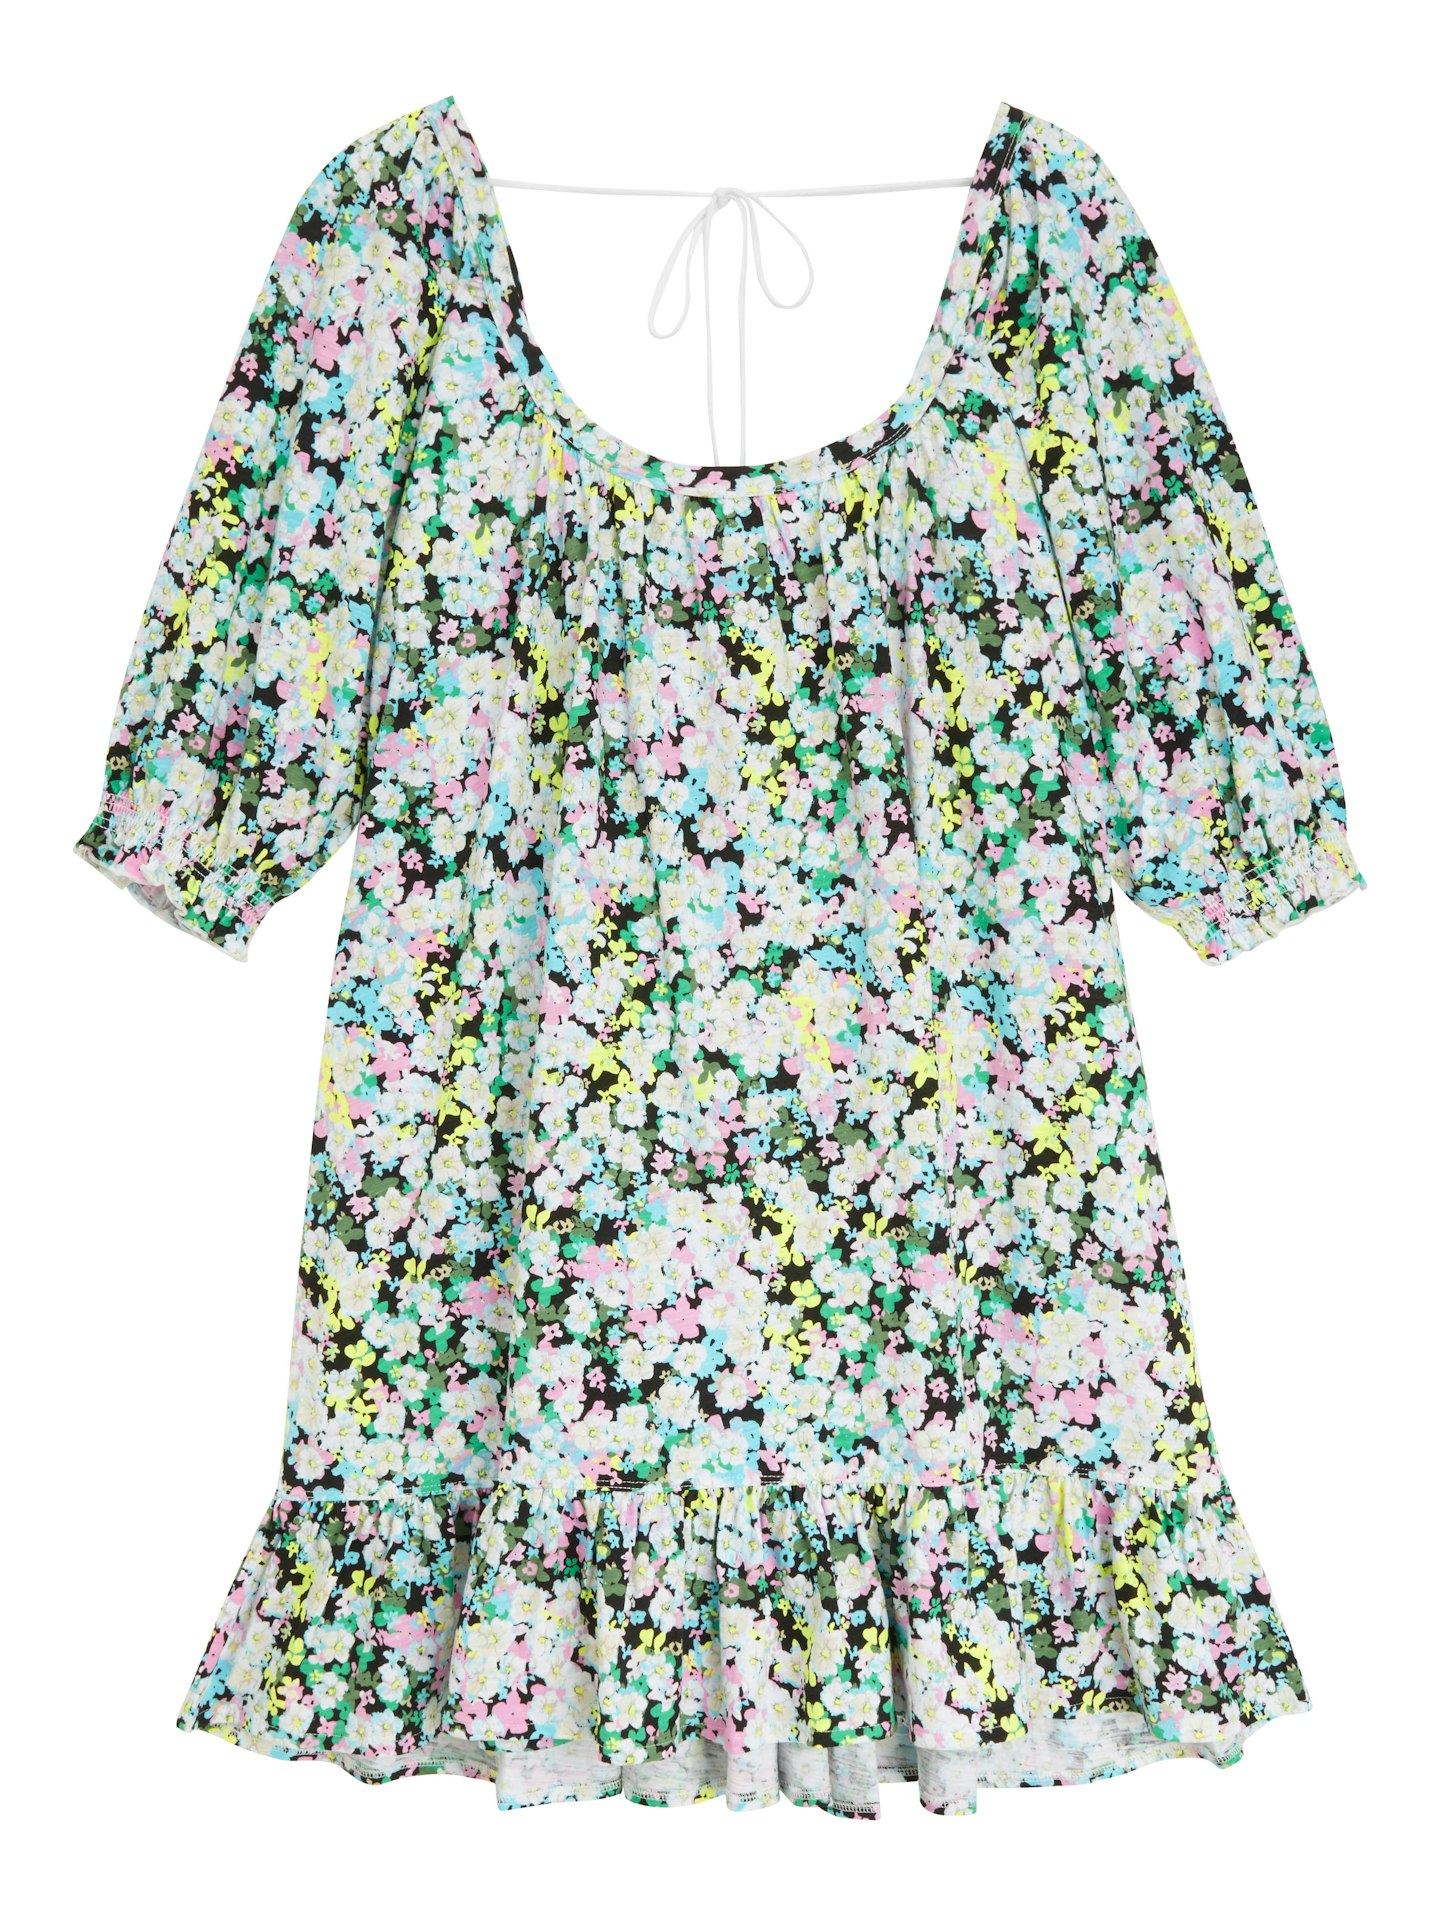 AND/OR, Jodie Daisy Print Cotton Jersey Dress, £49